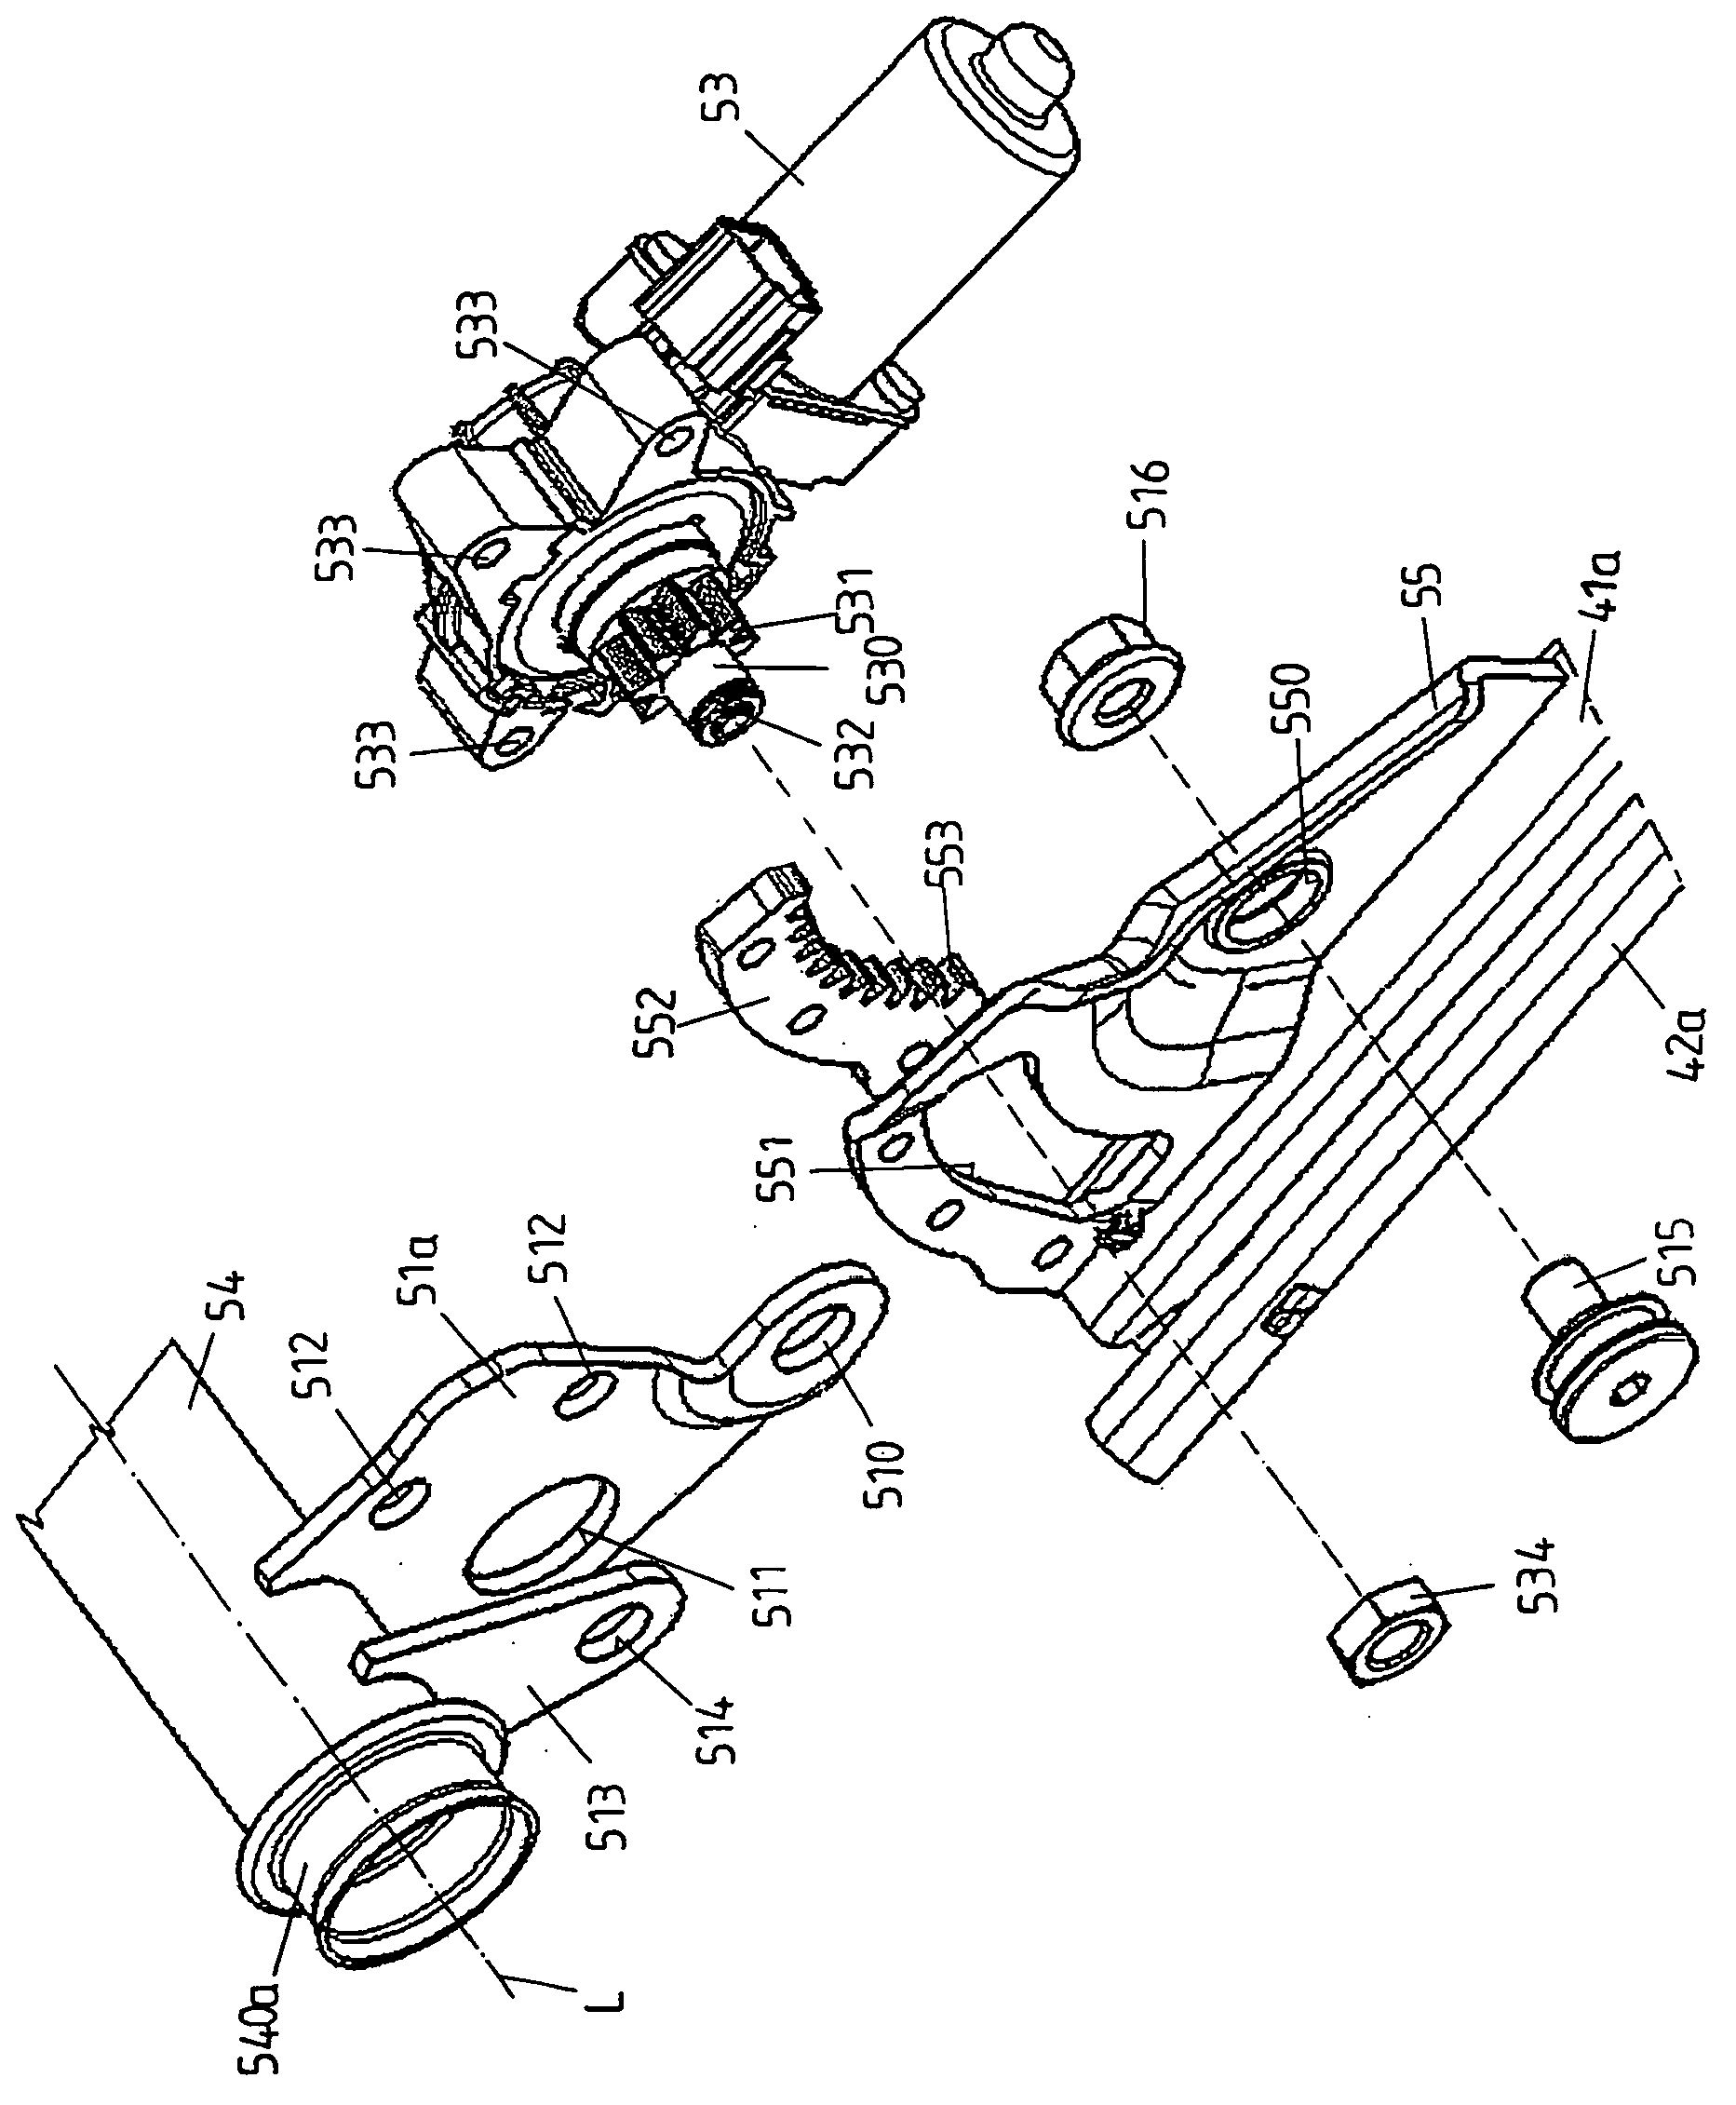 Vehicle seat having a height adjustment device